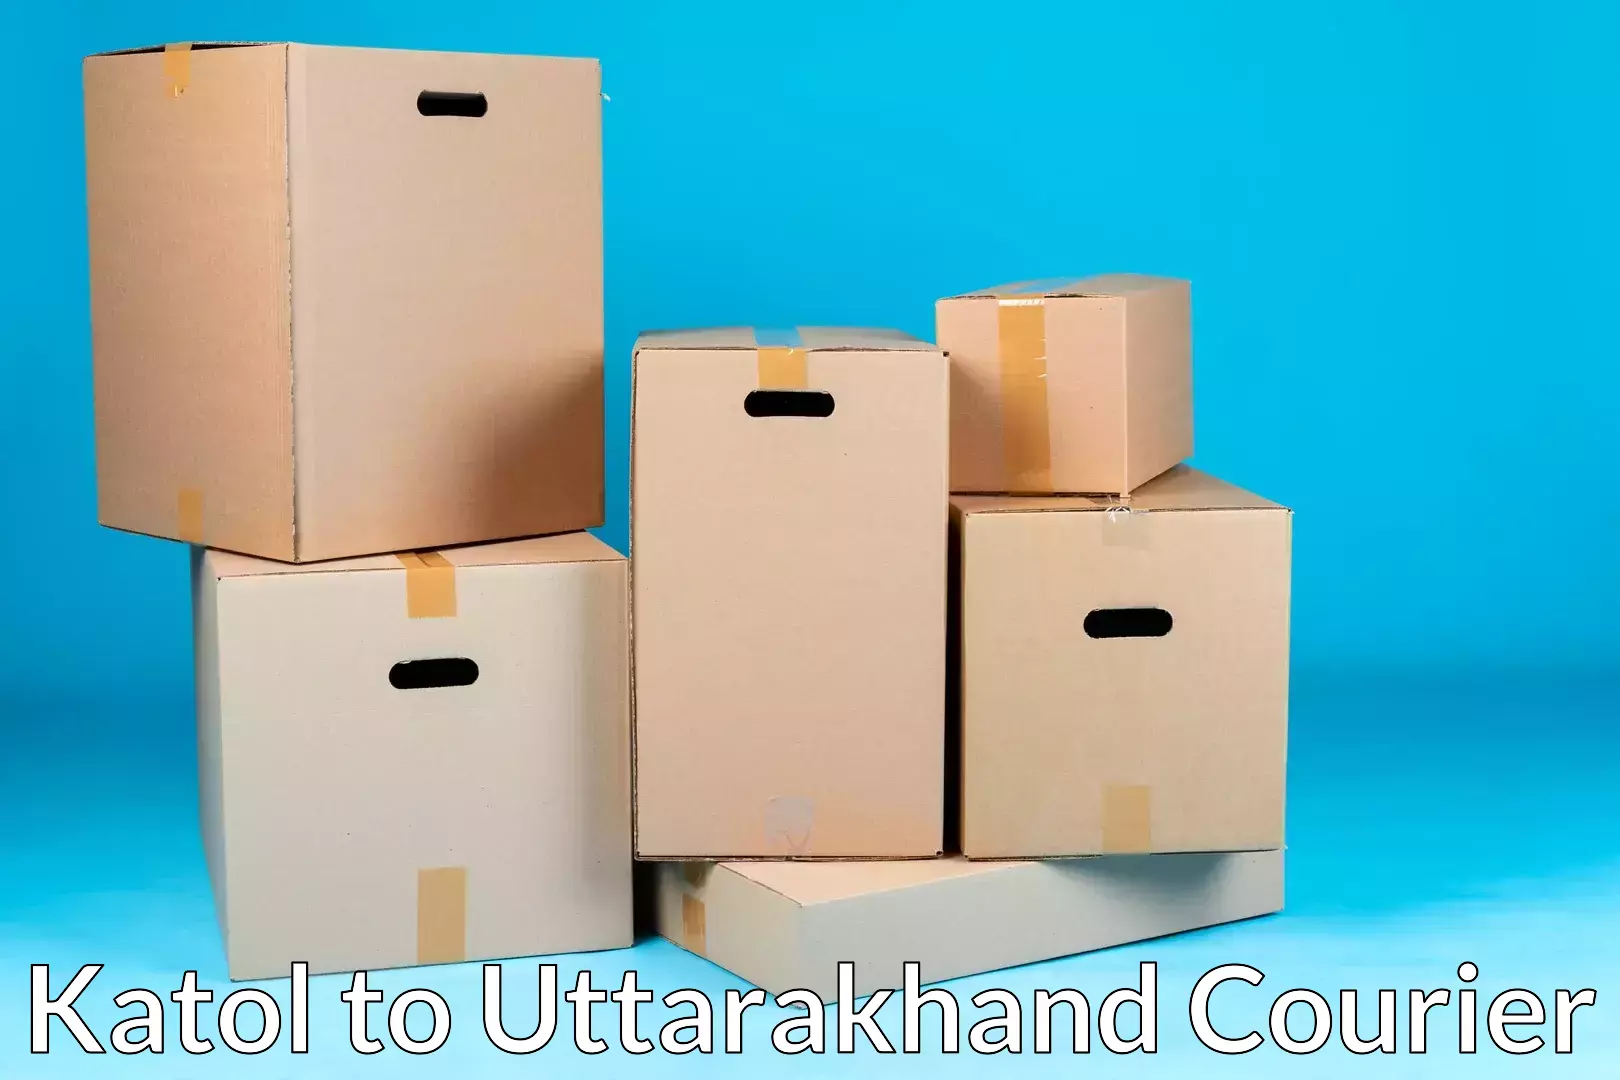 Quality relocation services Katol to Rishikesh